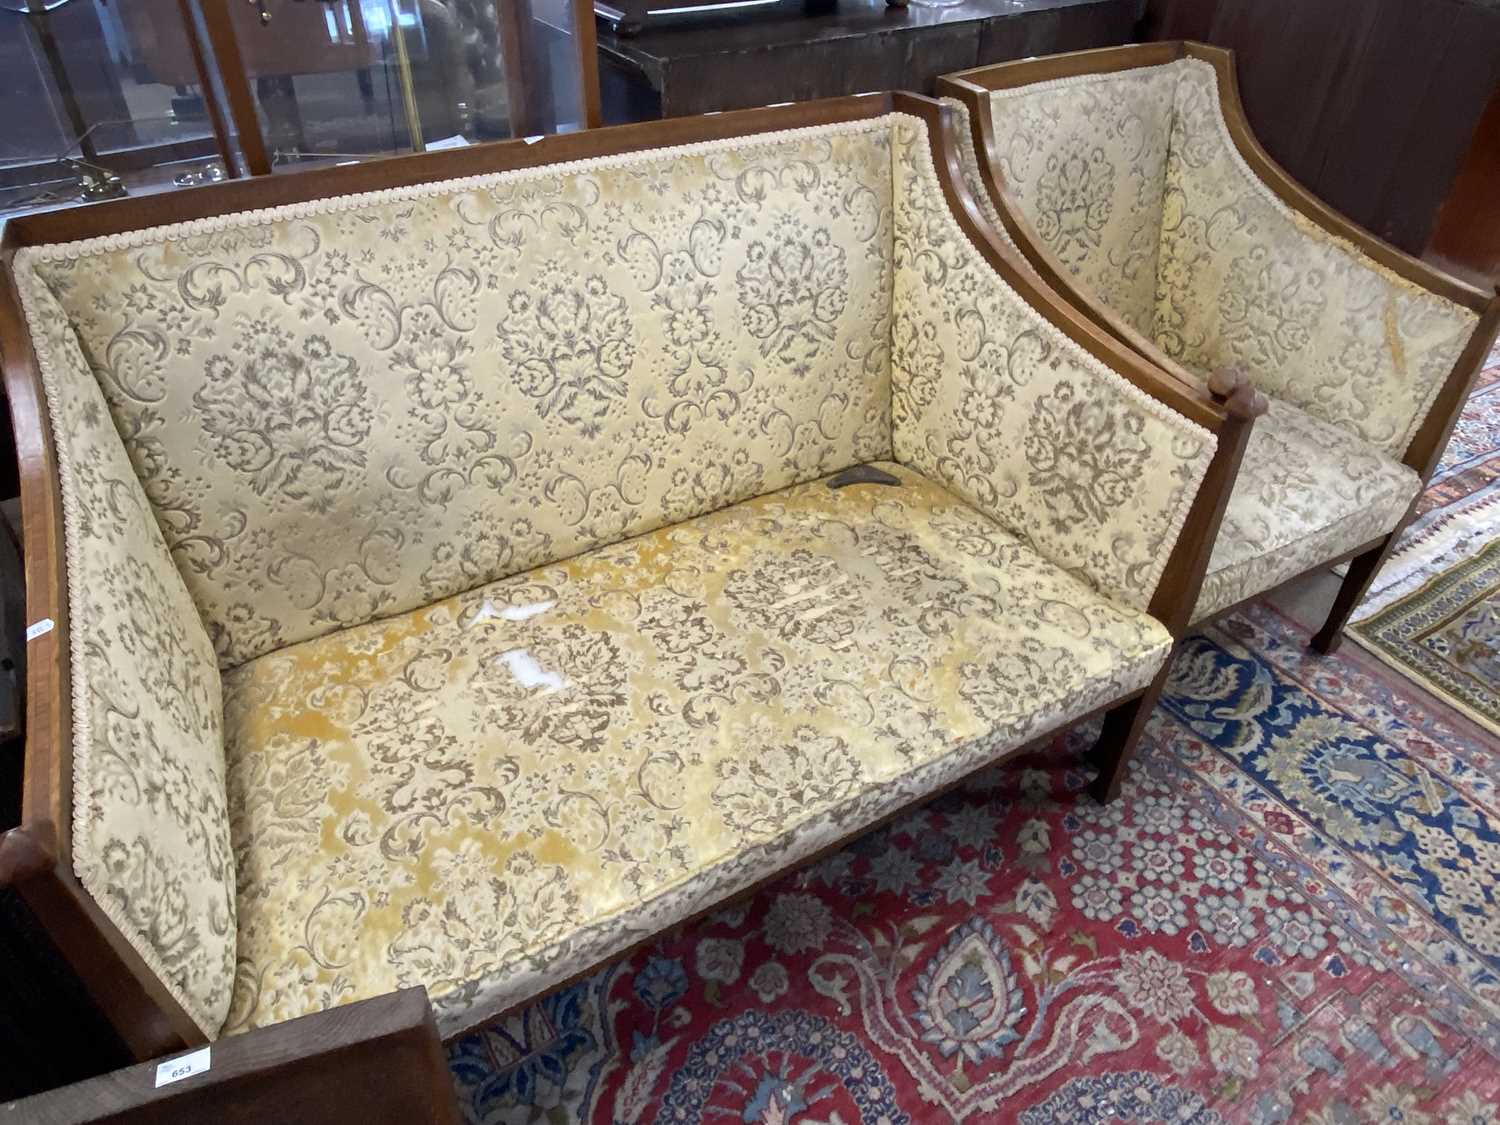 Edwardian mahogany framed and floral upholstered two seater sofa together with a matching